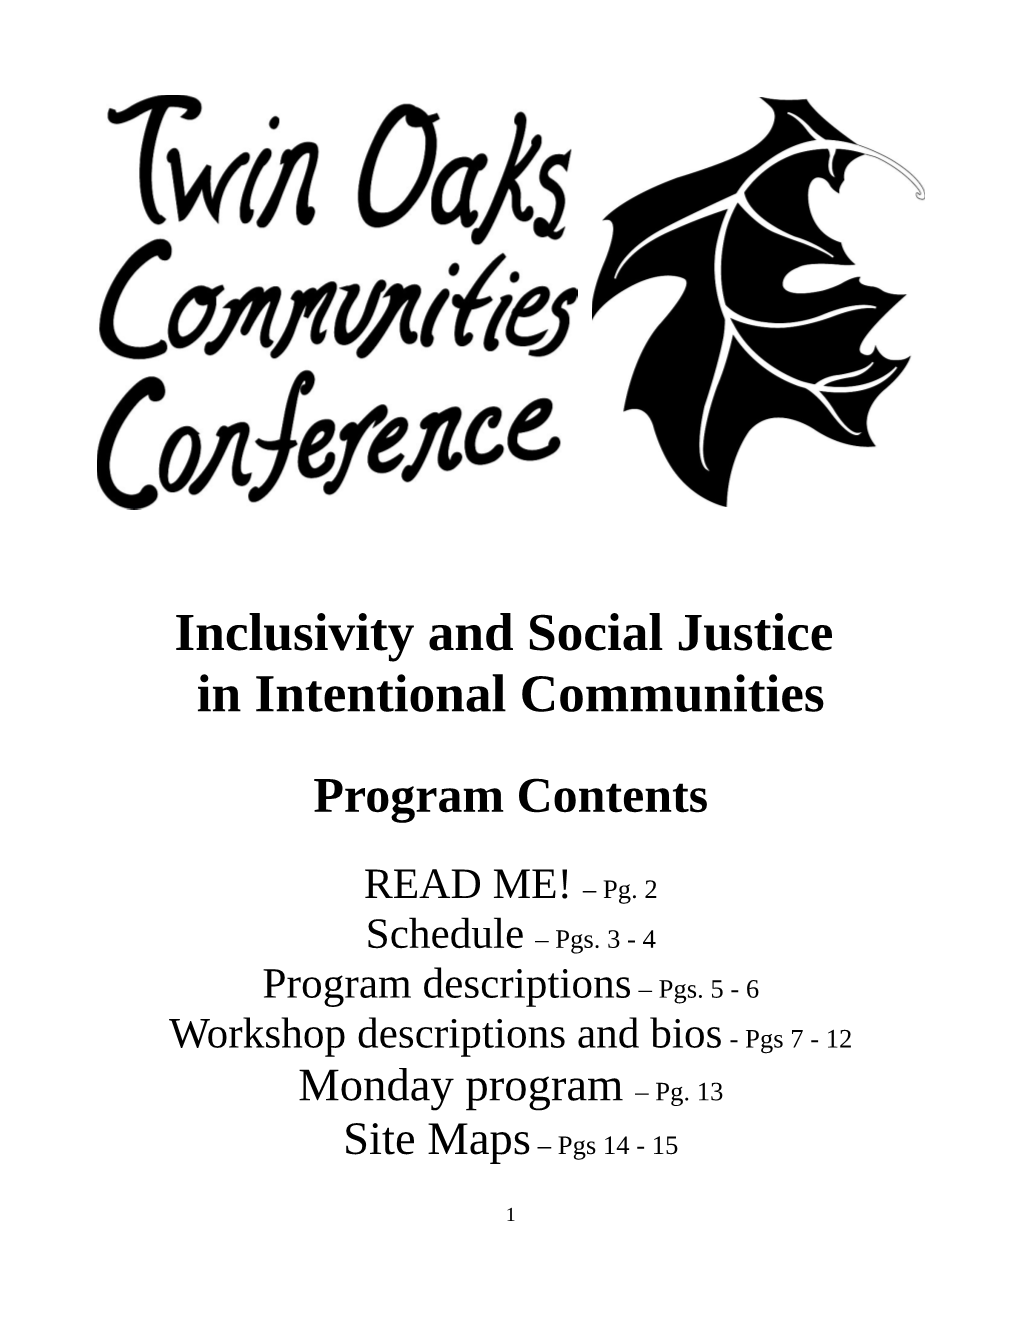 Inclusivity and Social Justice in Intentional Communities Program Contents